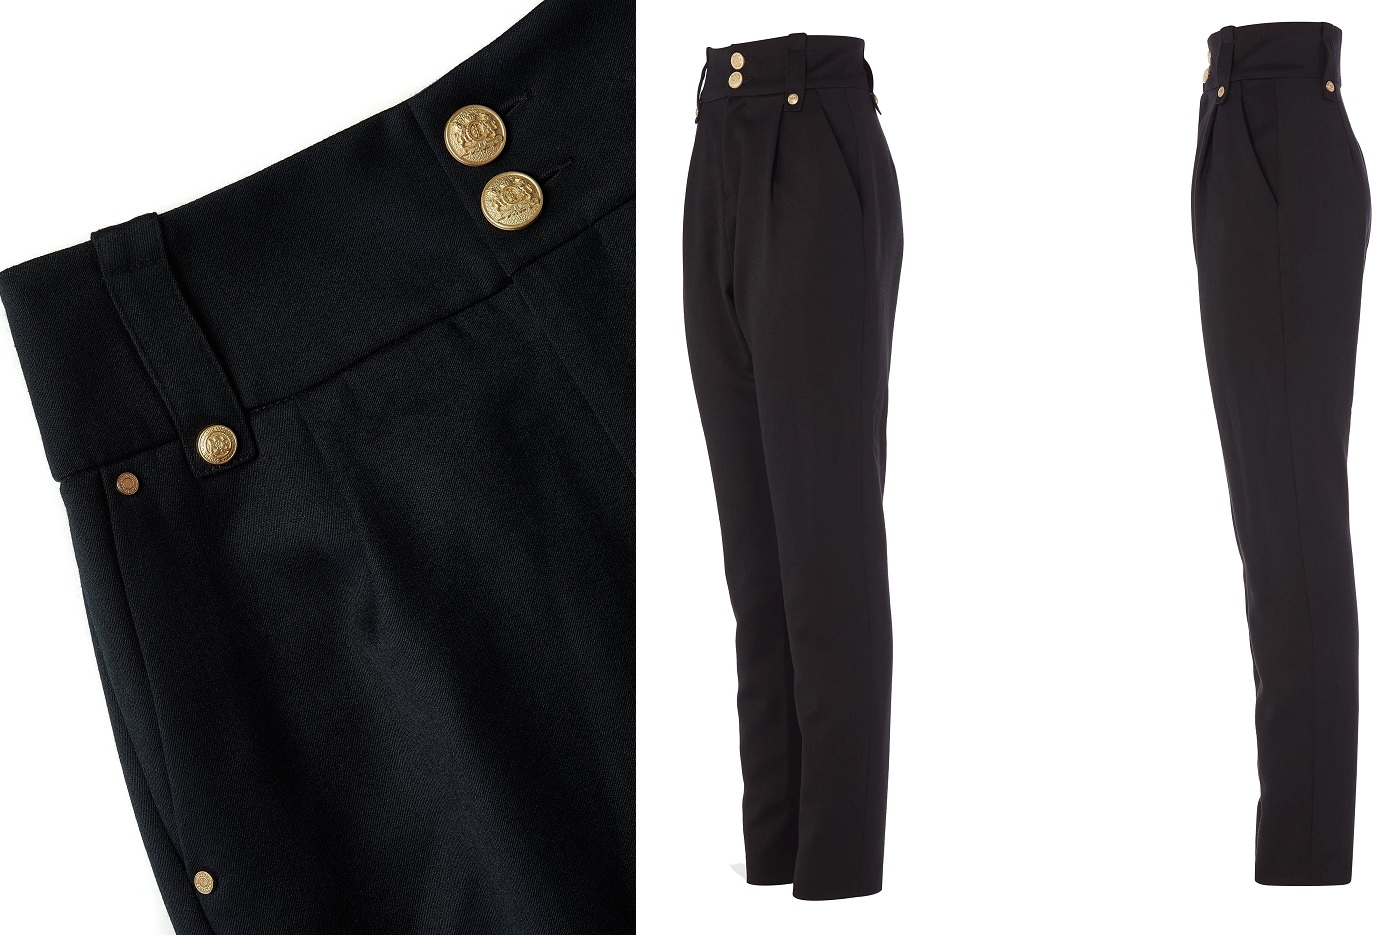 https://www.regalfille.com/wp-content/uploads/2022/08/The-Duchess-of-Cambridge-wore-Holland-Cooper-High-Waisted-Peg-Trousers-in-Black-Barathea-in-2021-for-a-video-call.jpg